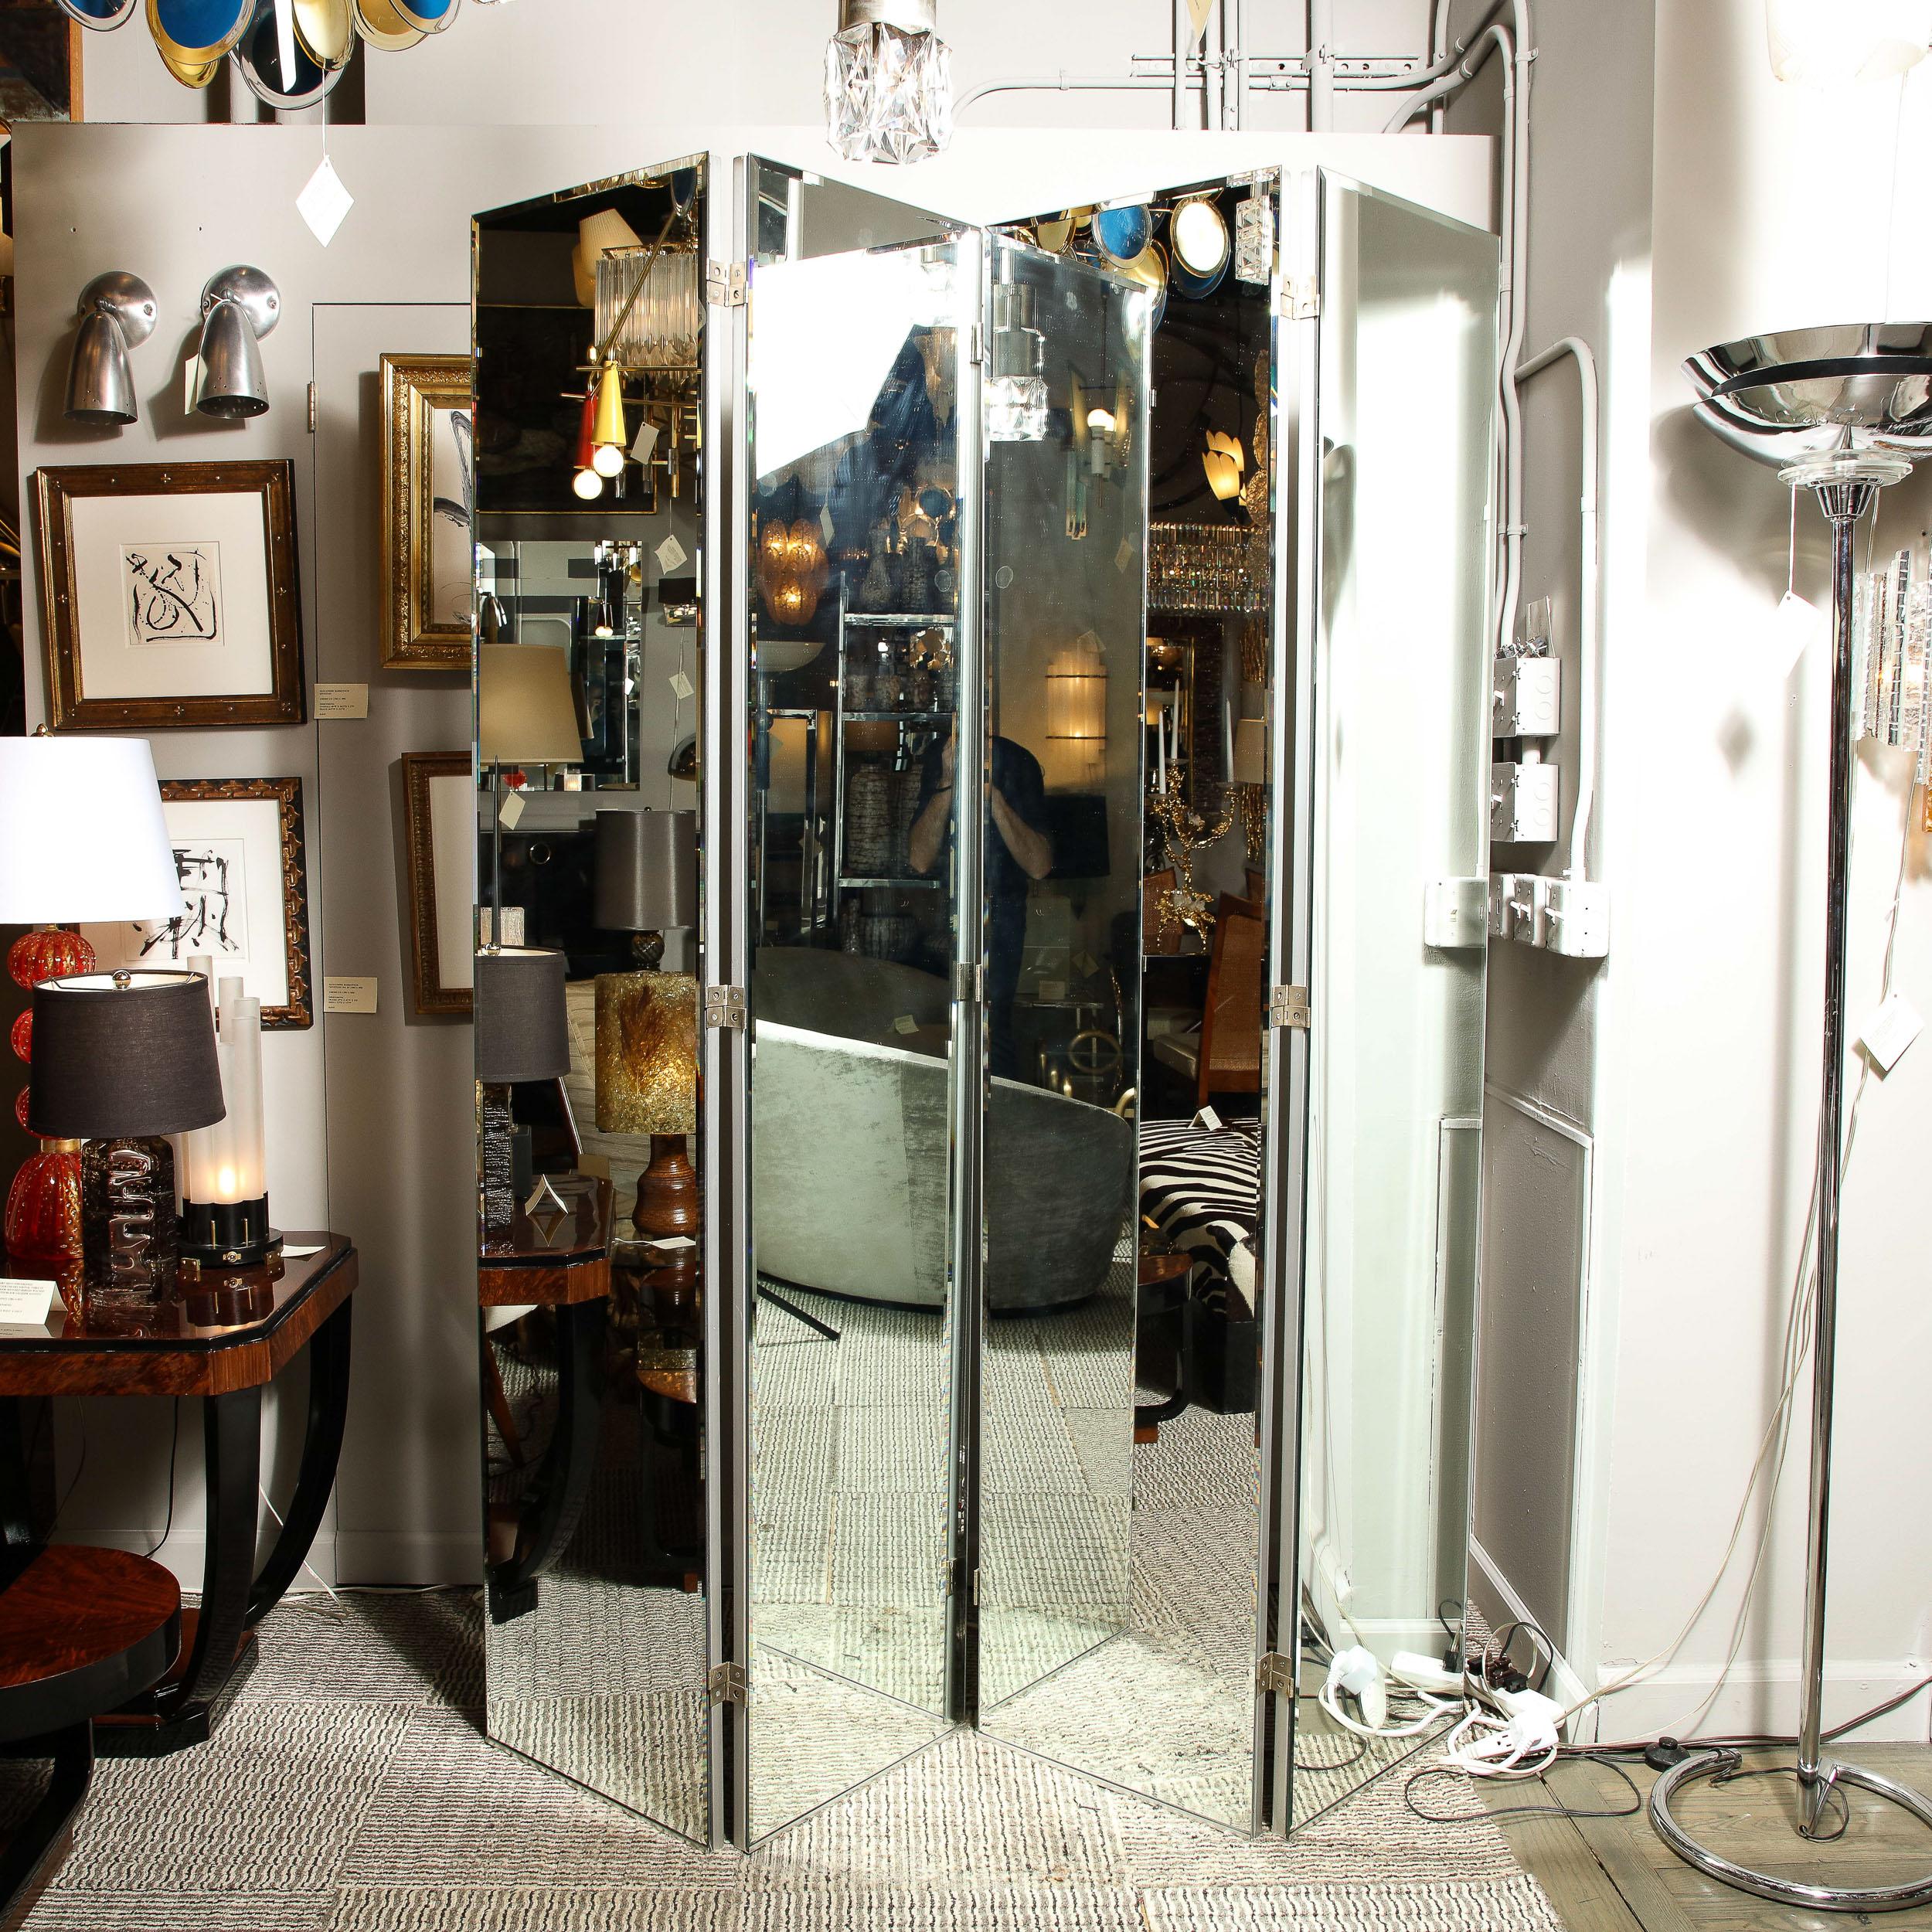 This impressive and monumental four panel Mid-Century Modern mirrored screen was realized in the United States circa 1970. It features four rectangular panels with beveled borders in a pristine clear mirror faceted with silver metal hinges- that